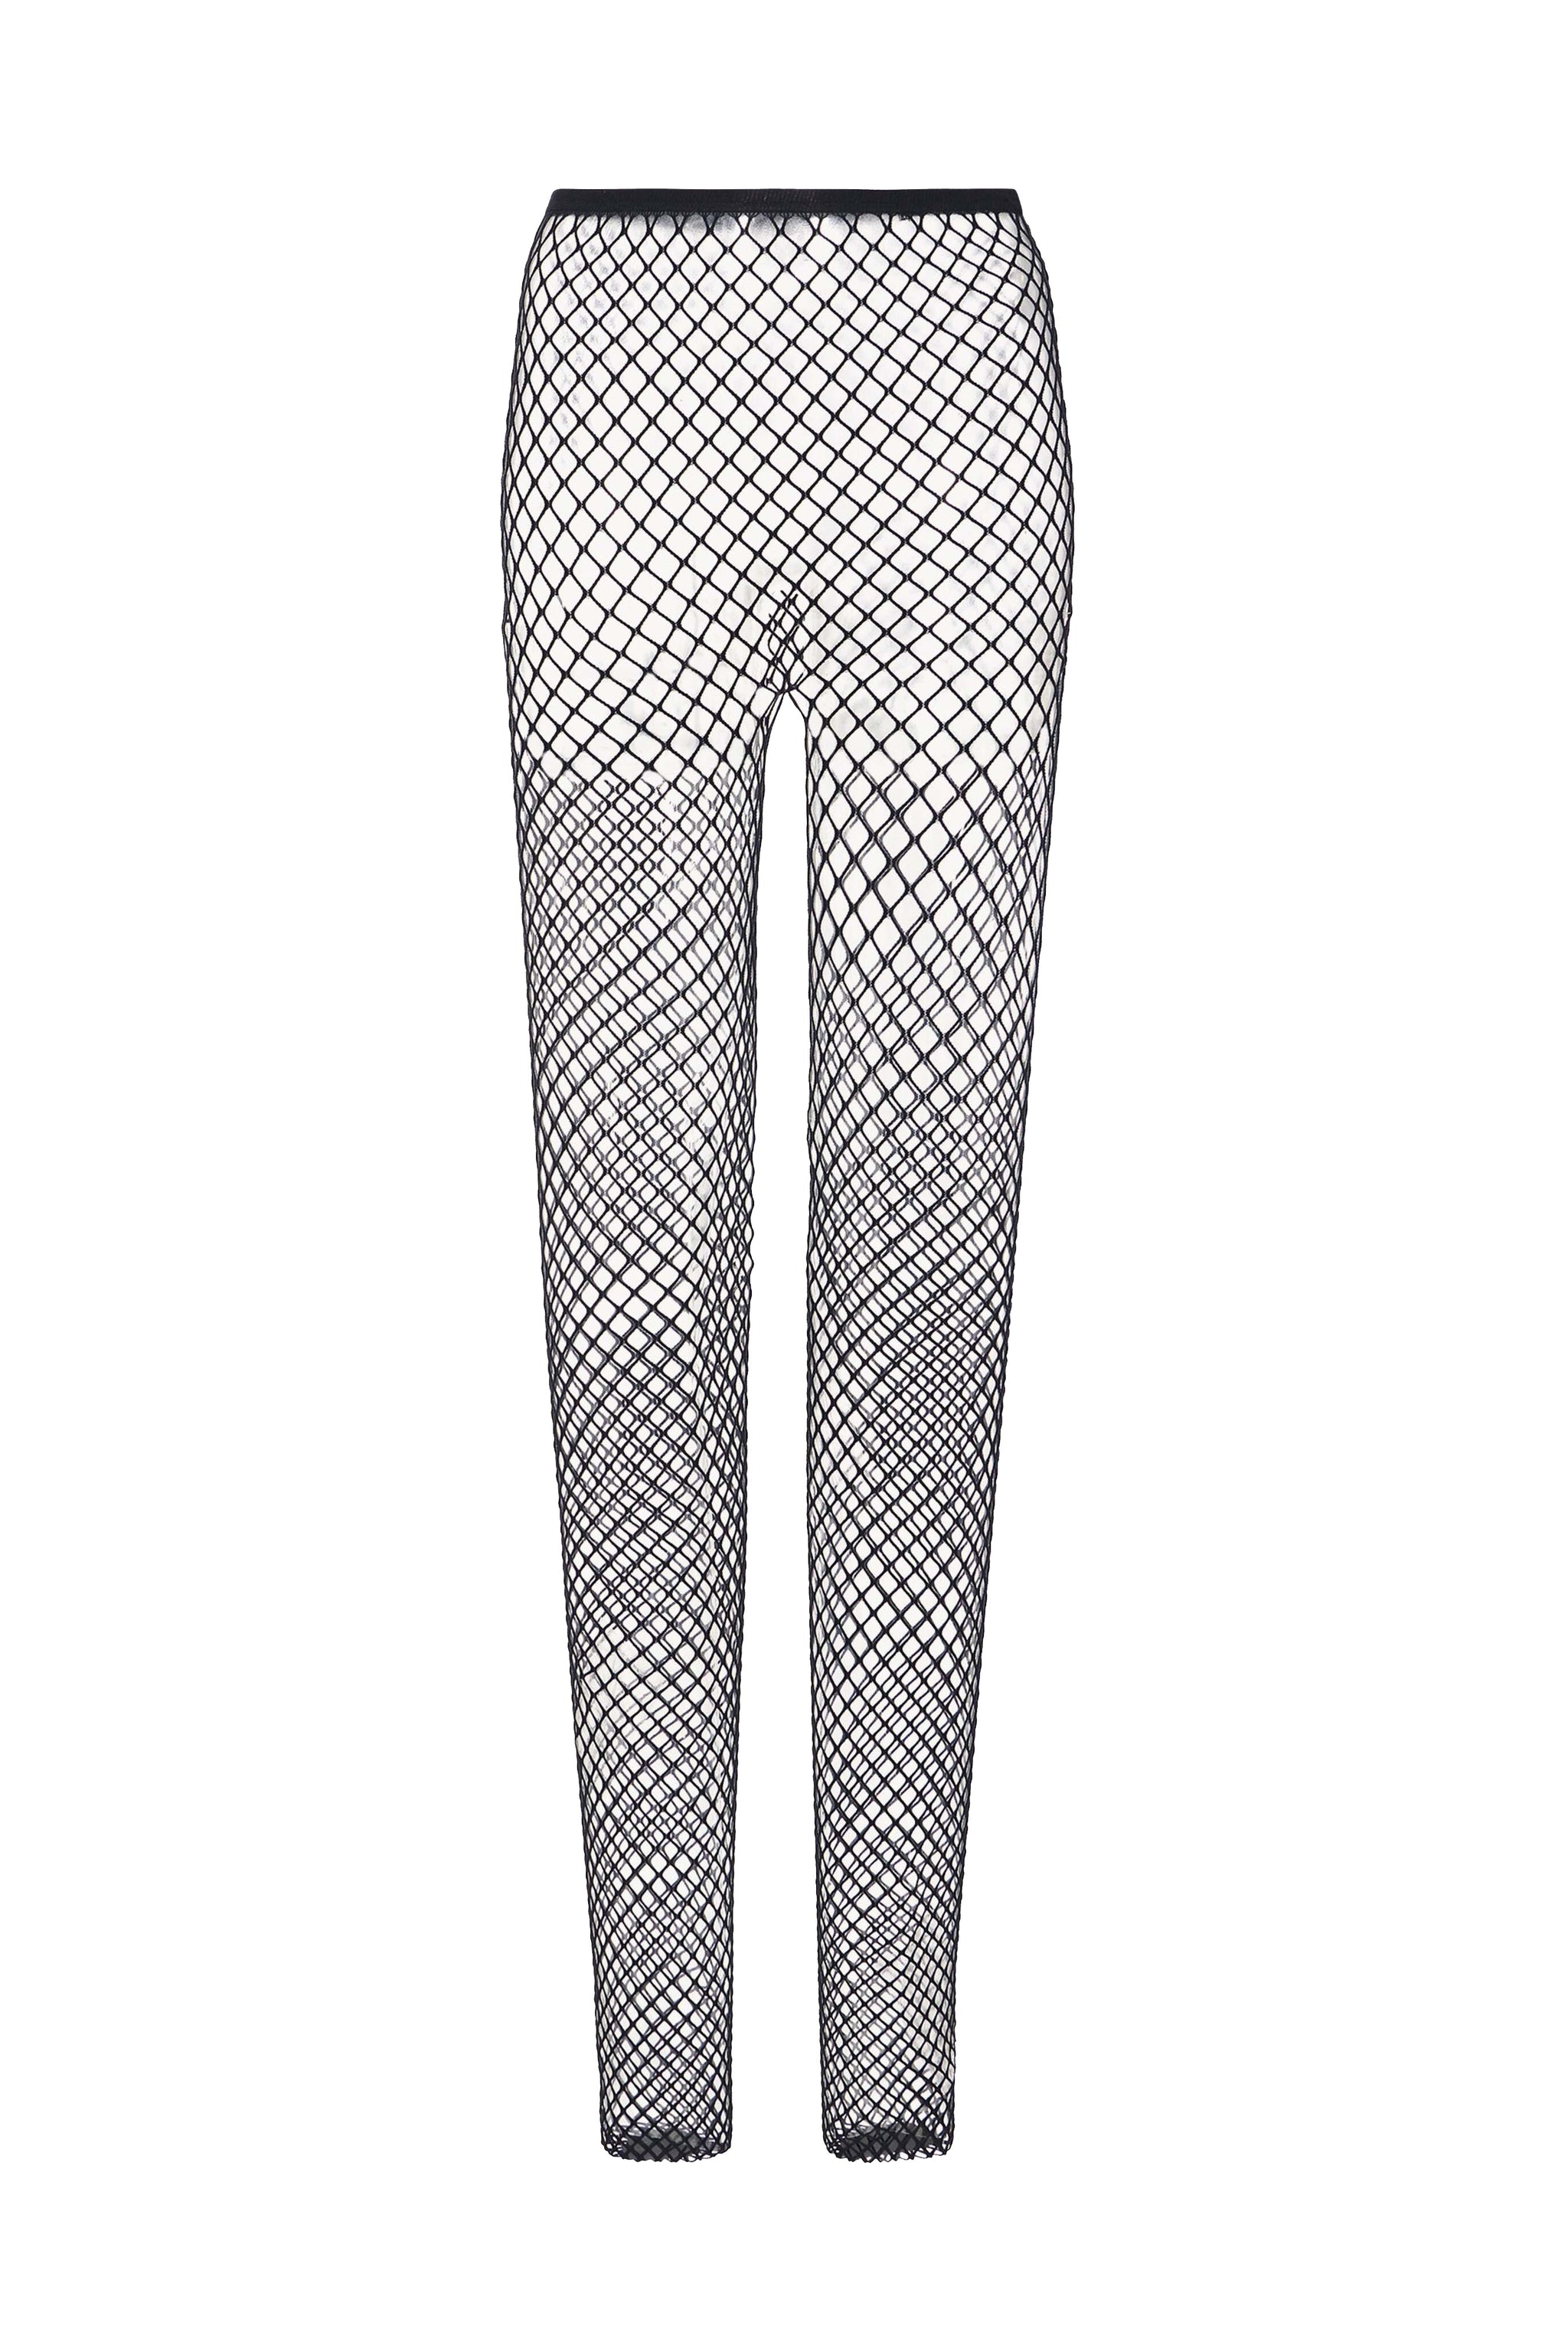 Can You Just Net Fishnet Pants